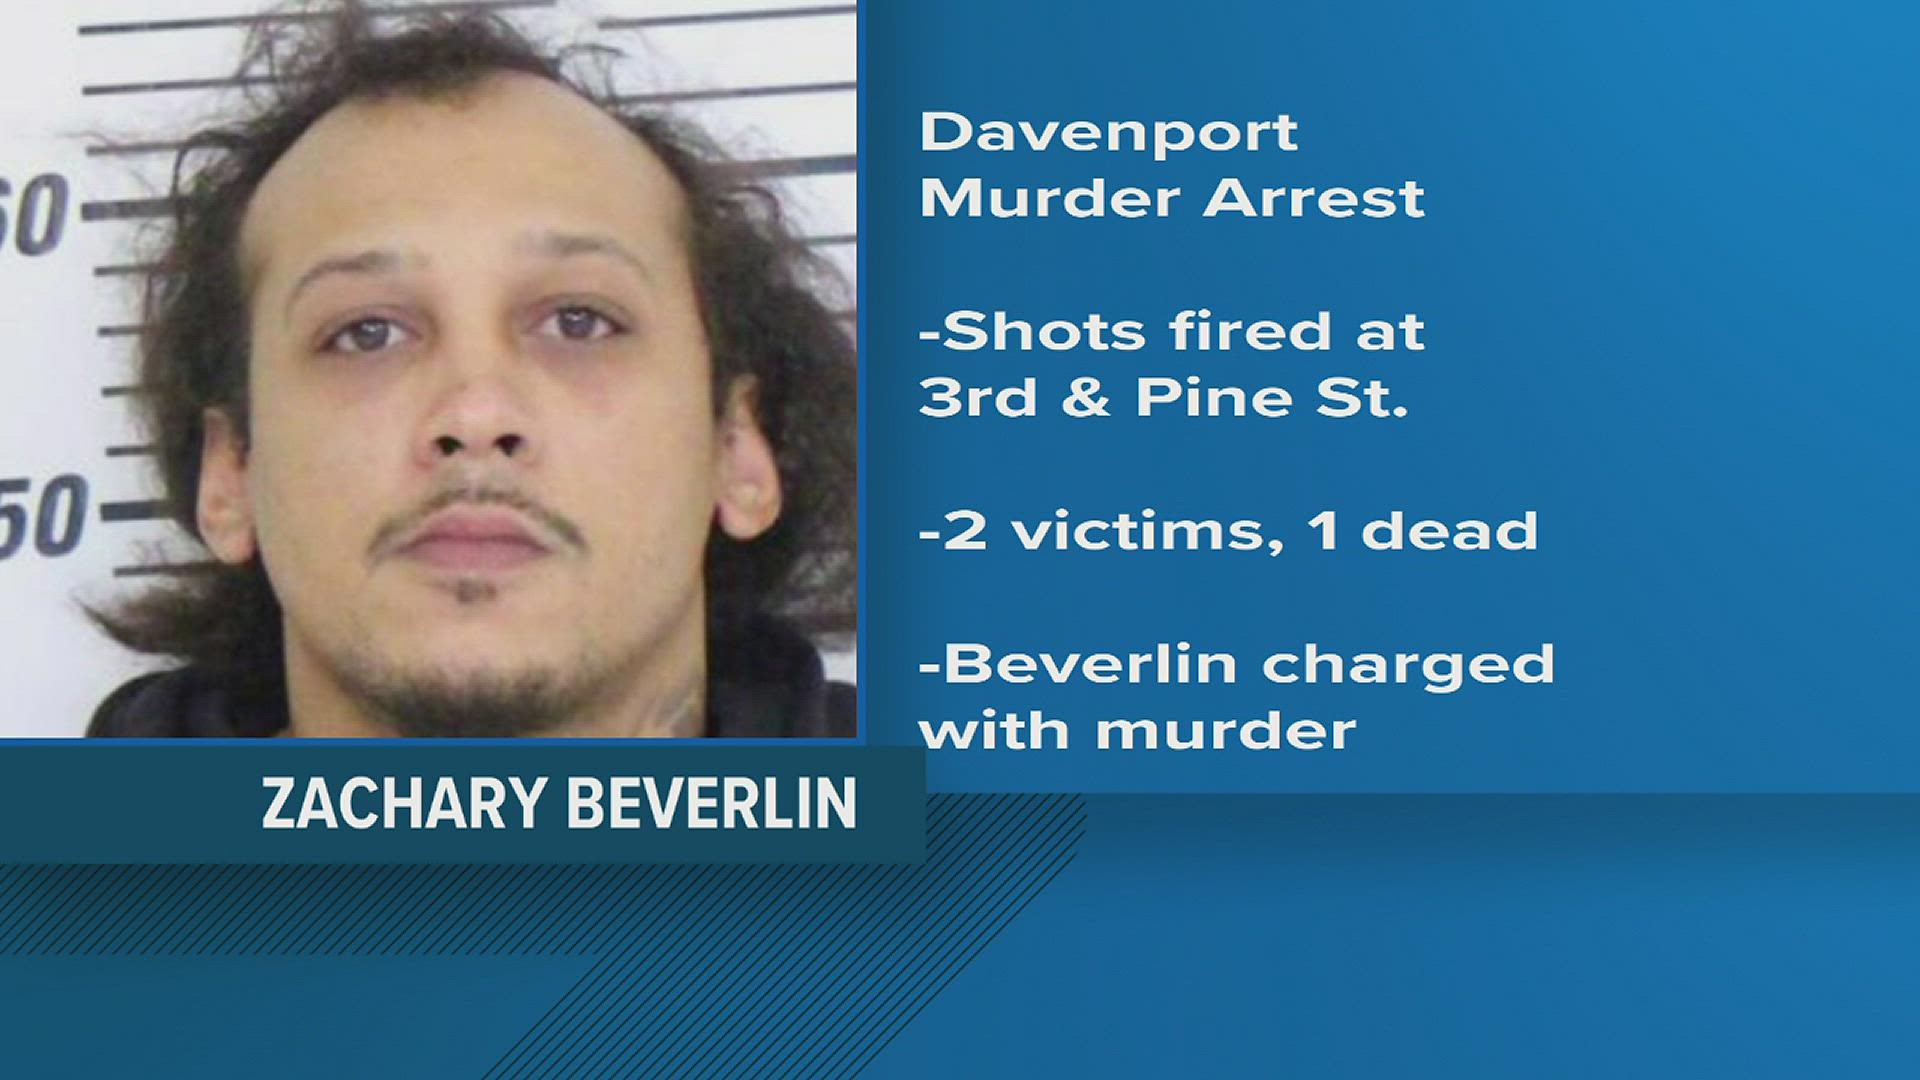 Police have found and charged a suspect with murder after a Davenport shooting that left a man dead and another in the hospital with serious injuries.